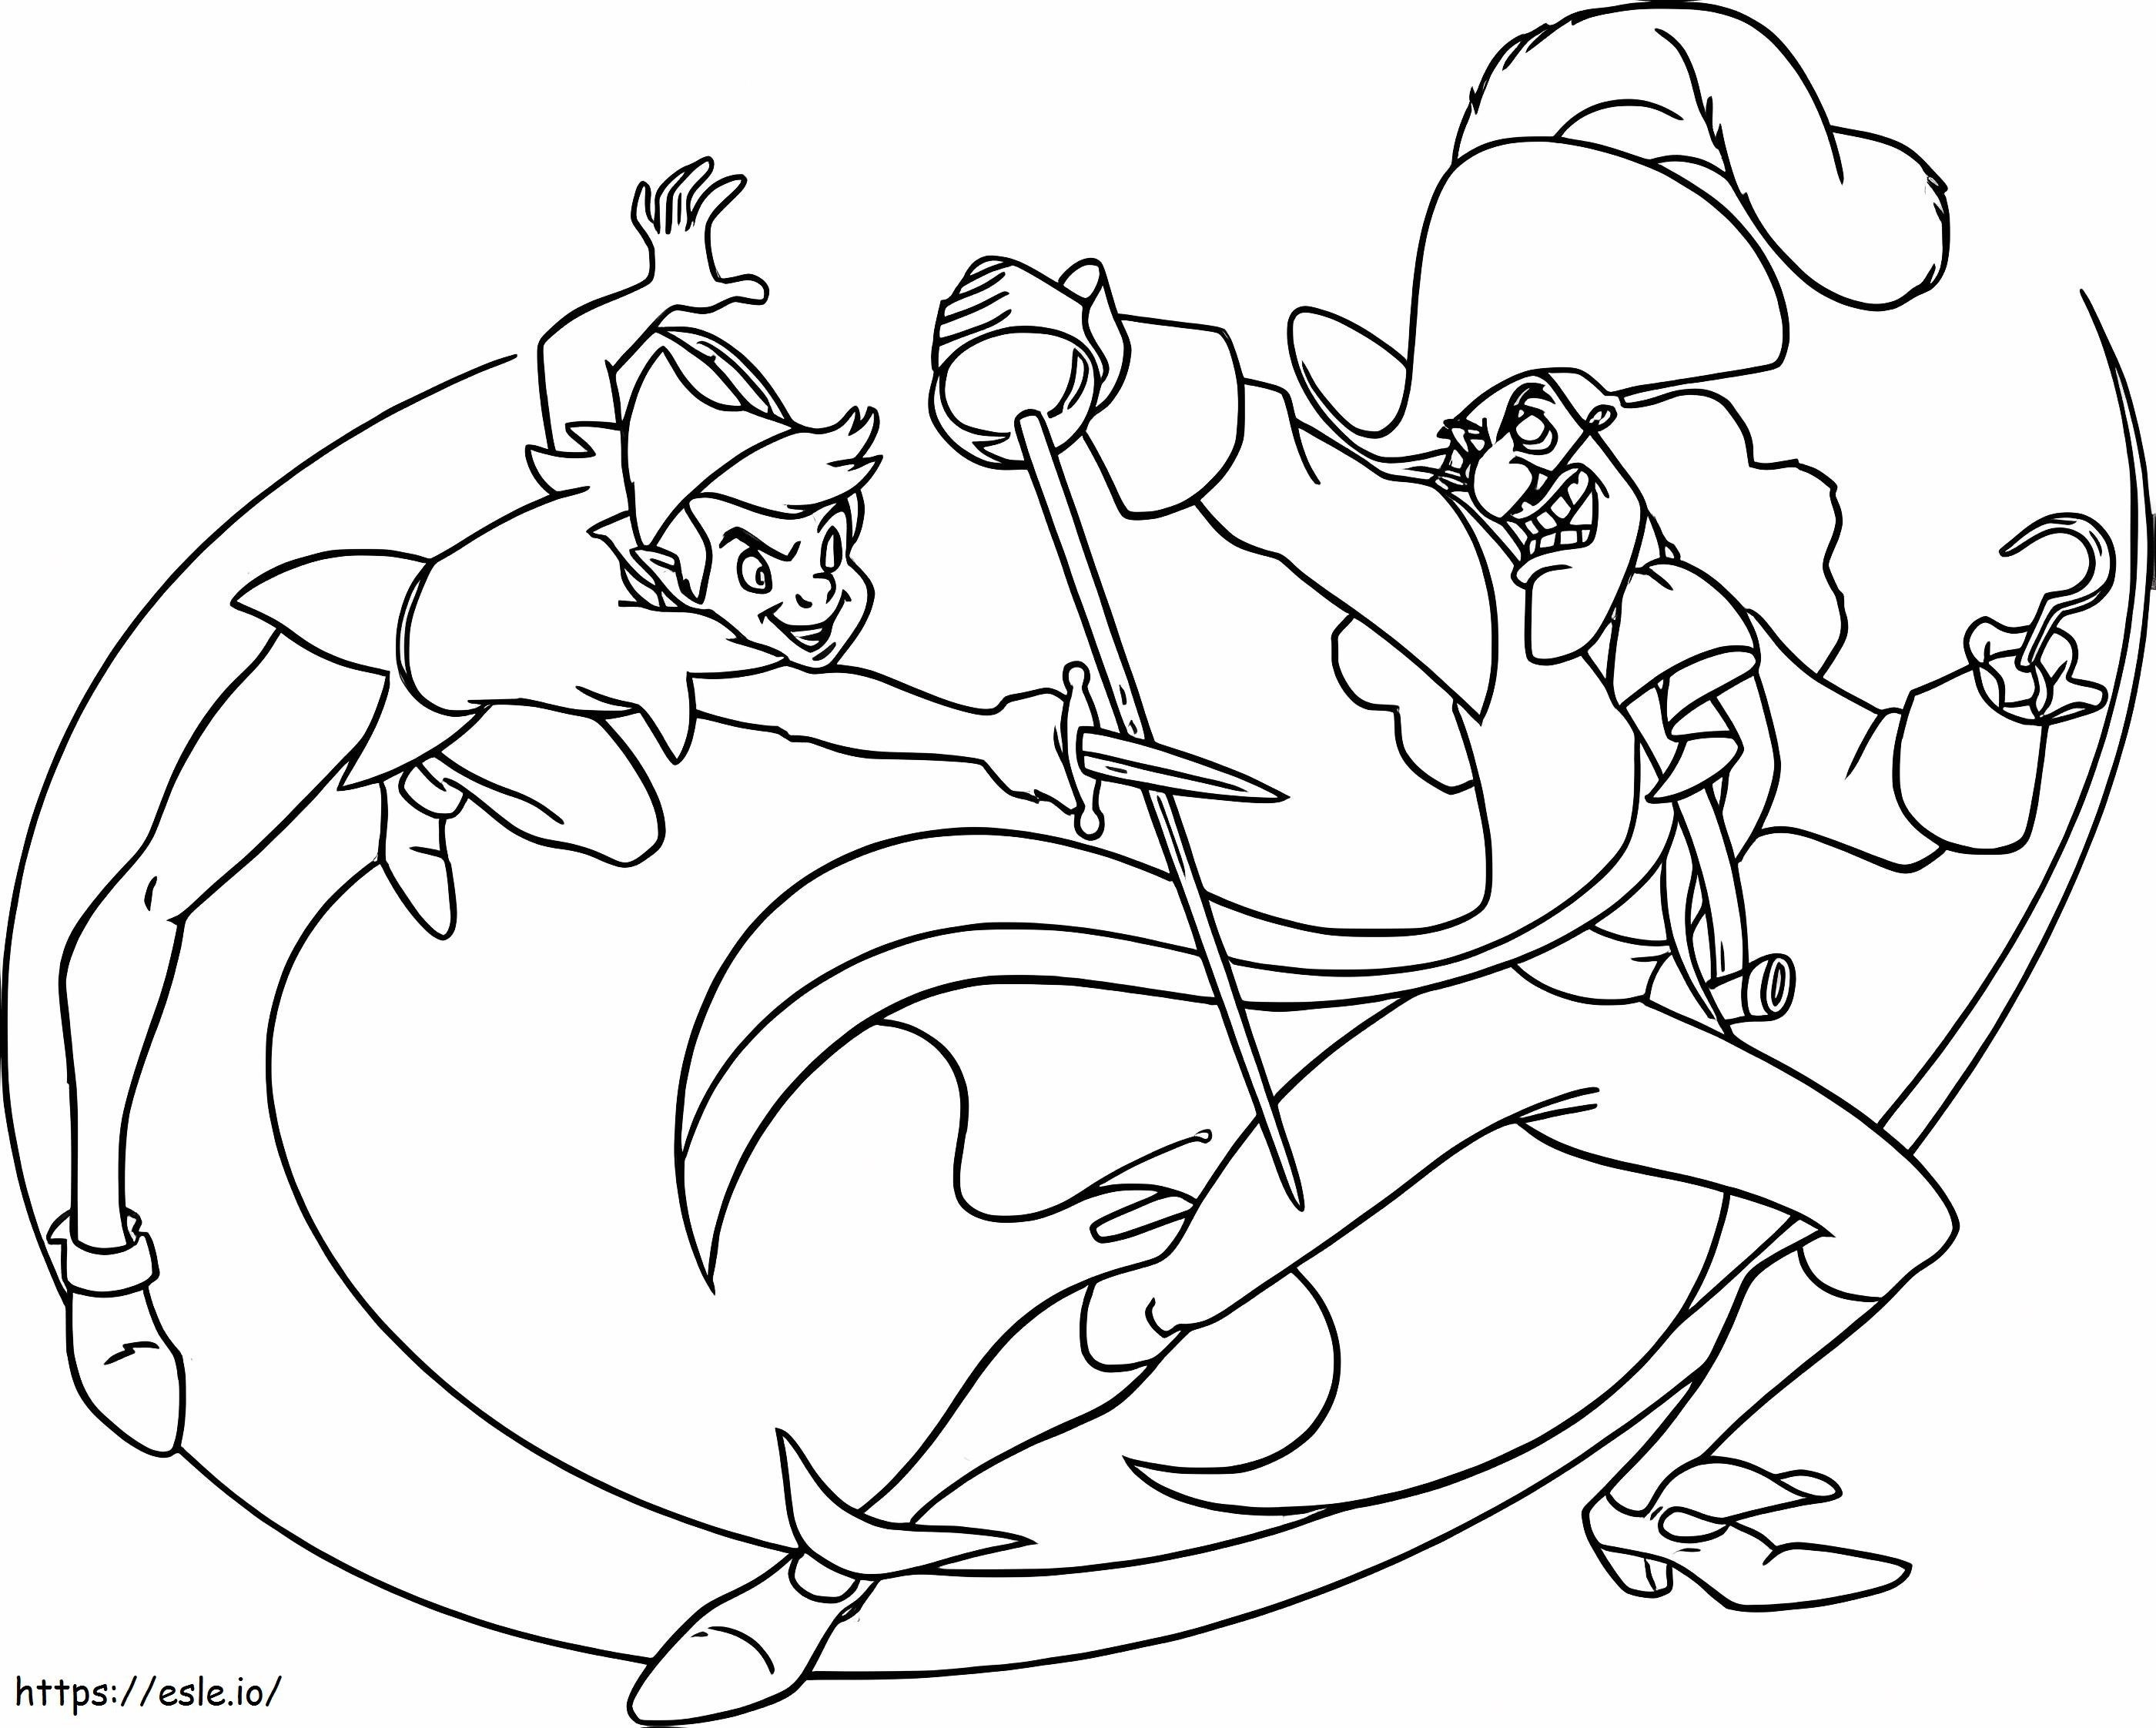 Peter Pan And Captain Hook Fighting coloring page